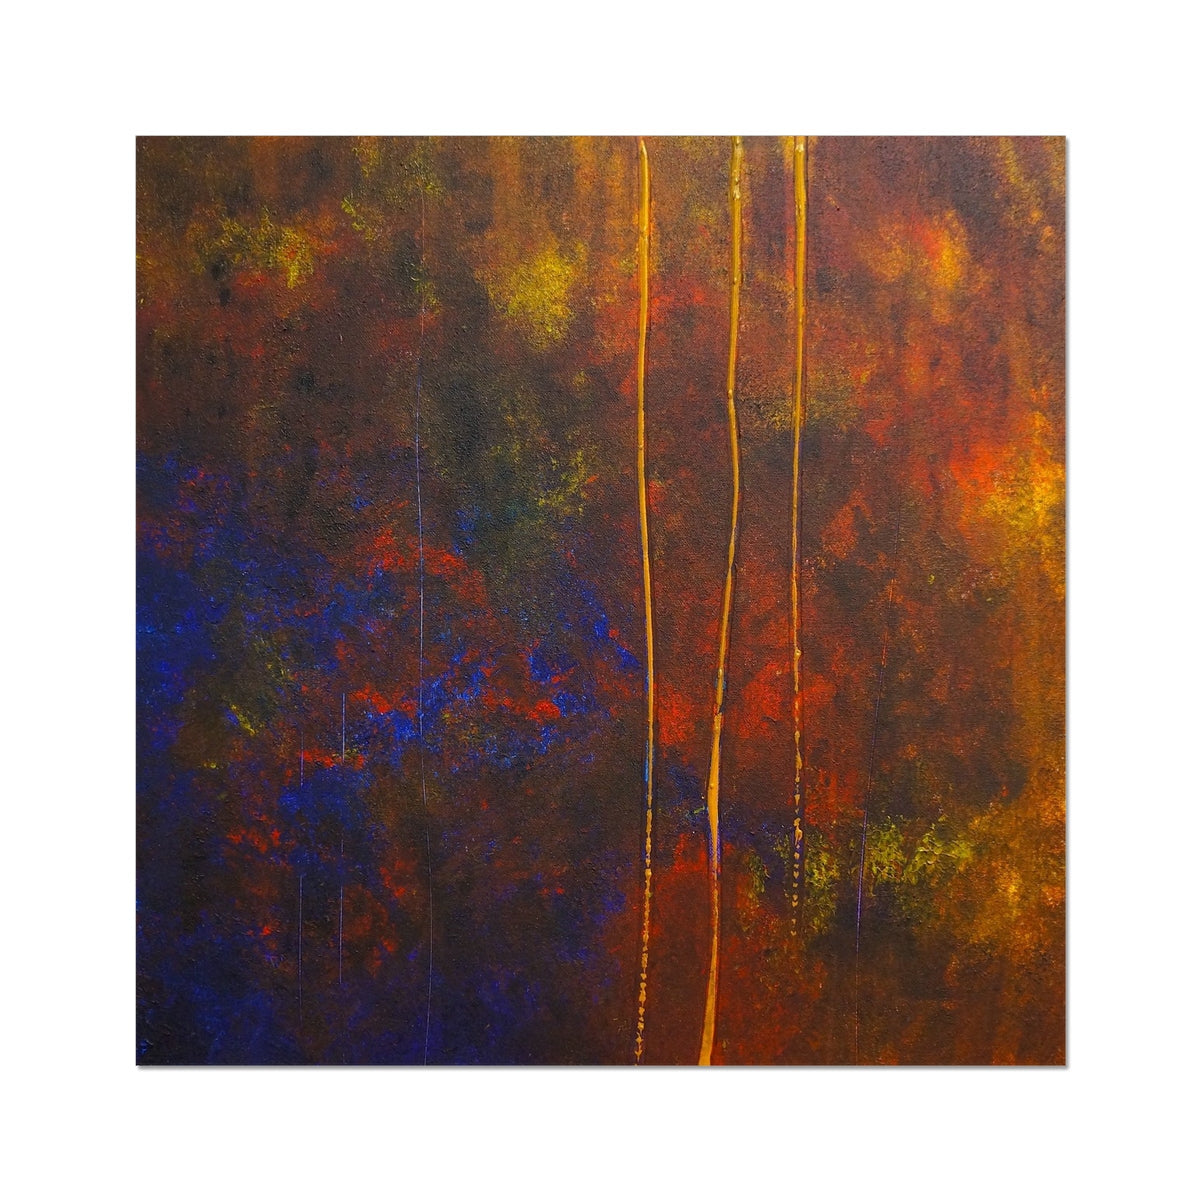 The Autumn Wood Abstract Painting | Artist Proof Collector Prints From Scotland-Artist Proof Collector Prints-Abstract & Impressionistic Art Gallery-20"x20"-Paintings, Prints, Homeware, Art Gifts From Scotland By Scottish Artist Kevin Hunter